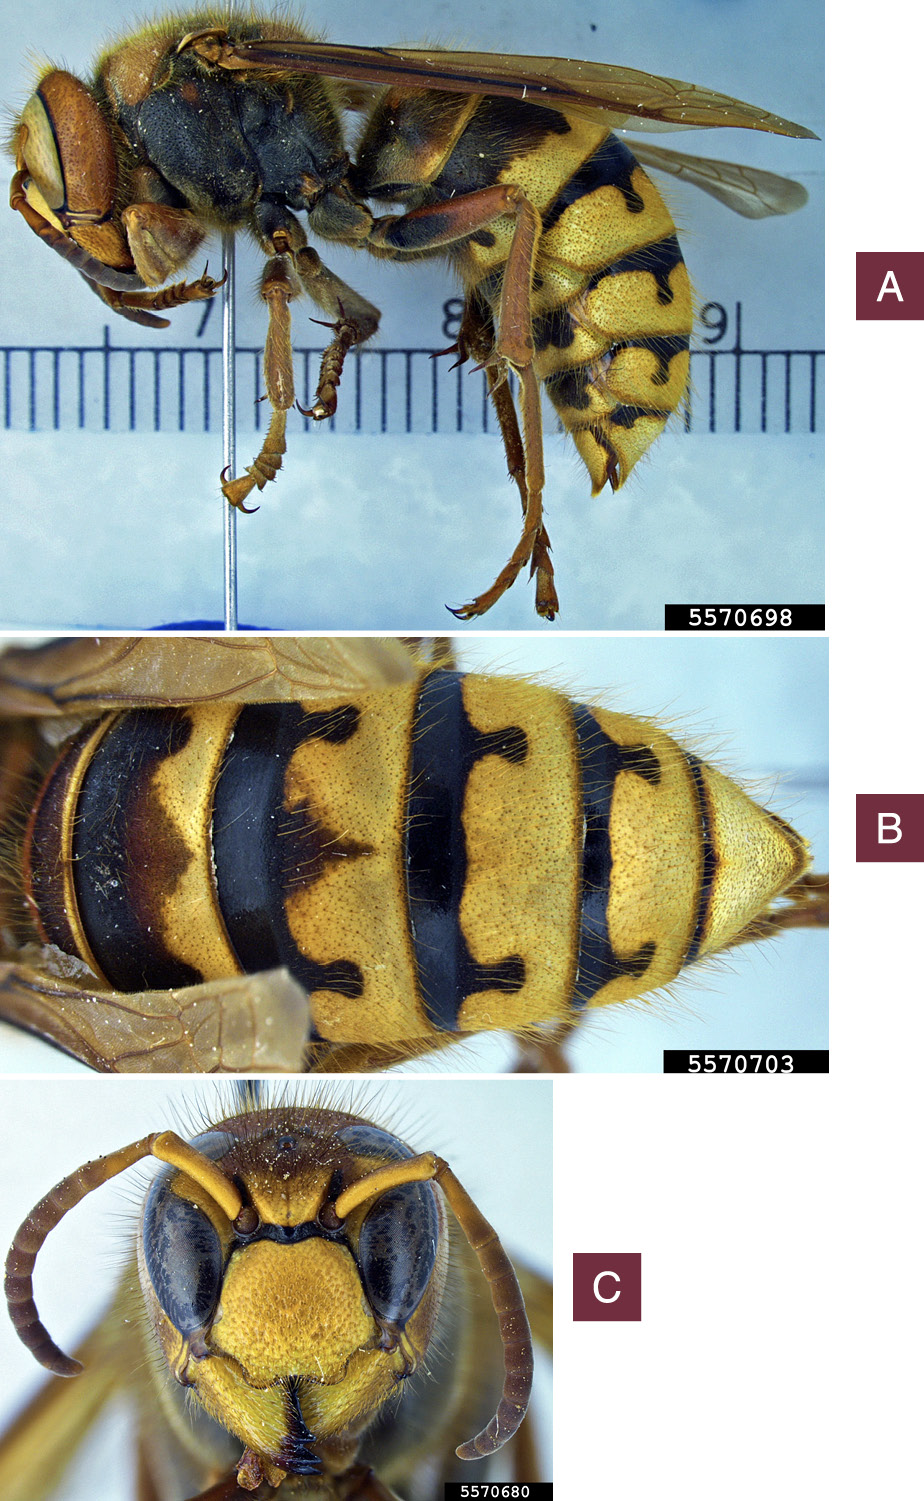 Close-up, side profile of a pinned European hornet specimen.Close-up of black bands with teardrop extensions on the topside of a European hornet’s abdomen.Close-up of a European hornet’s face and antennae.